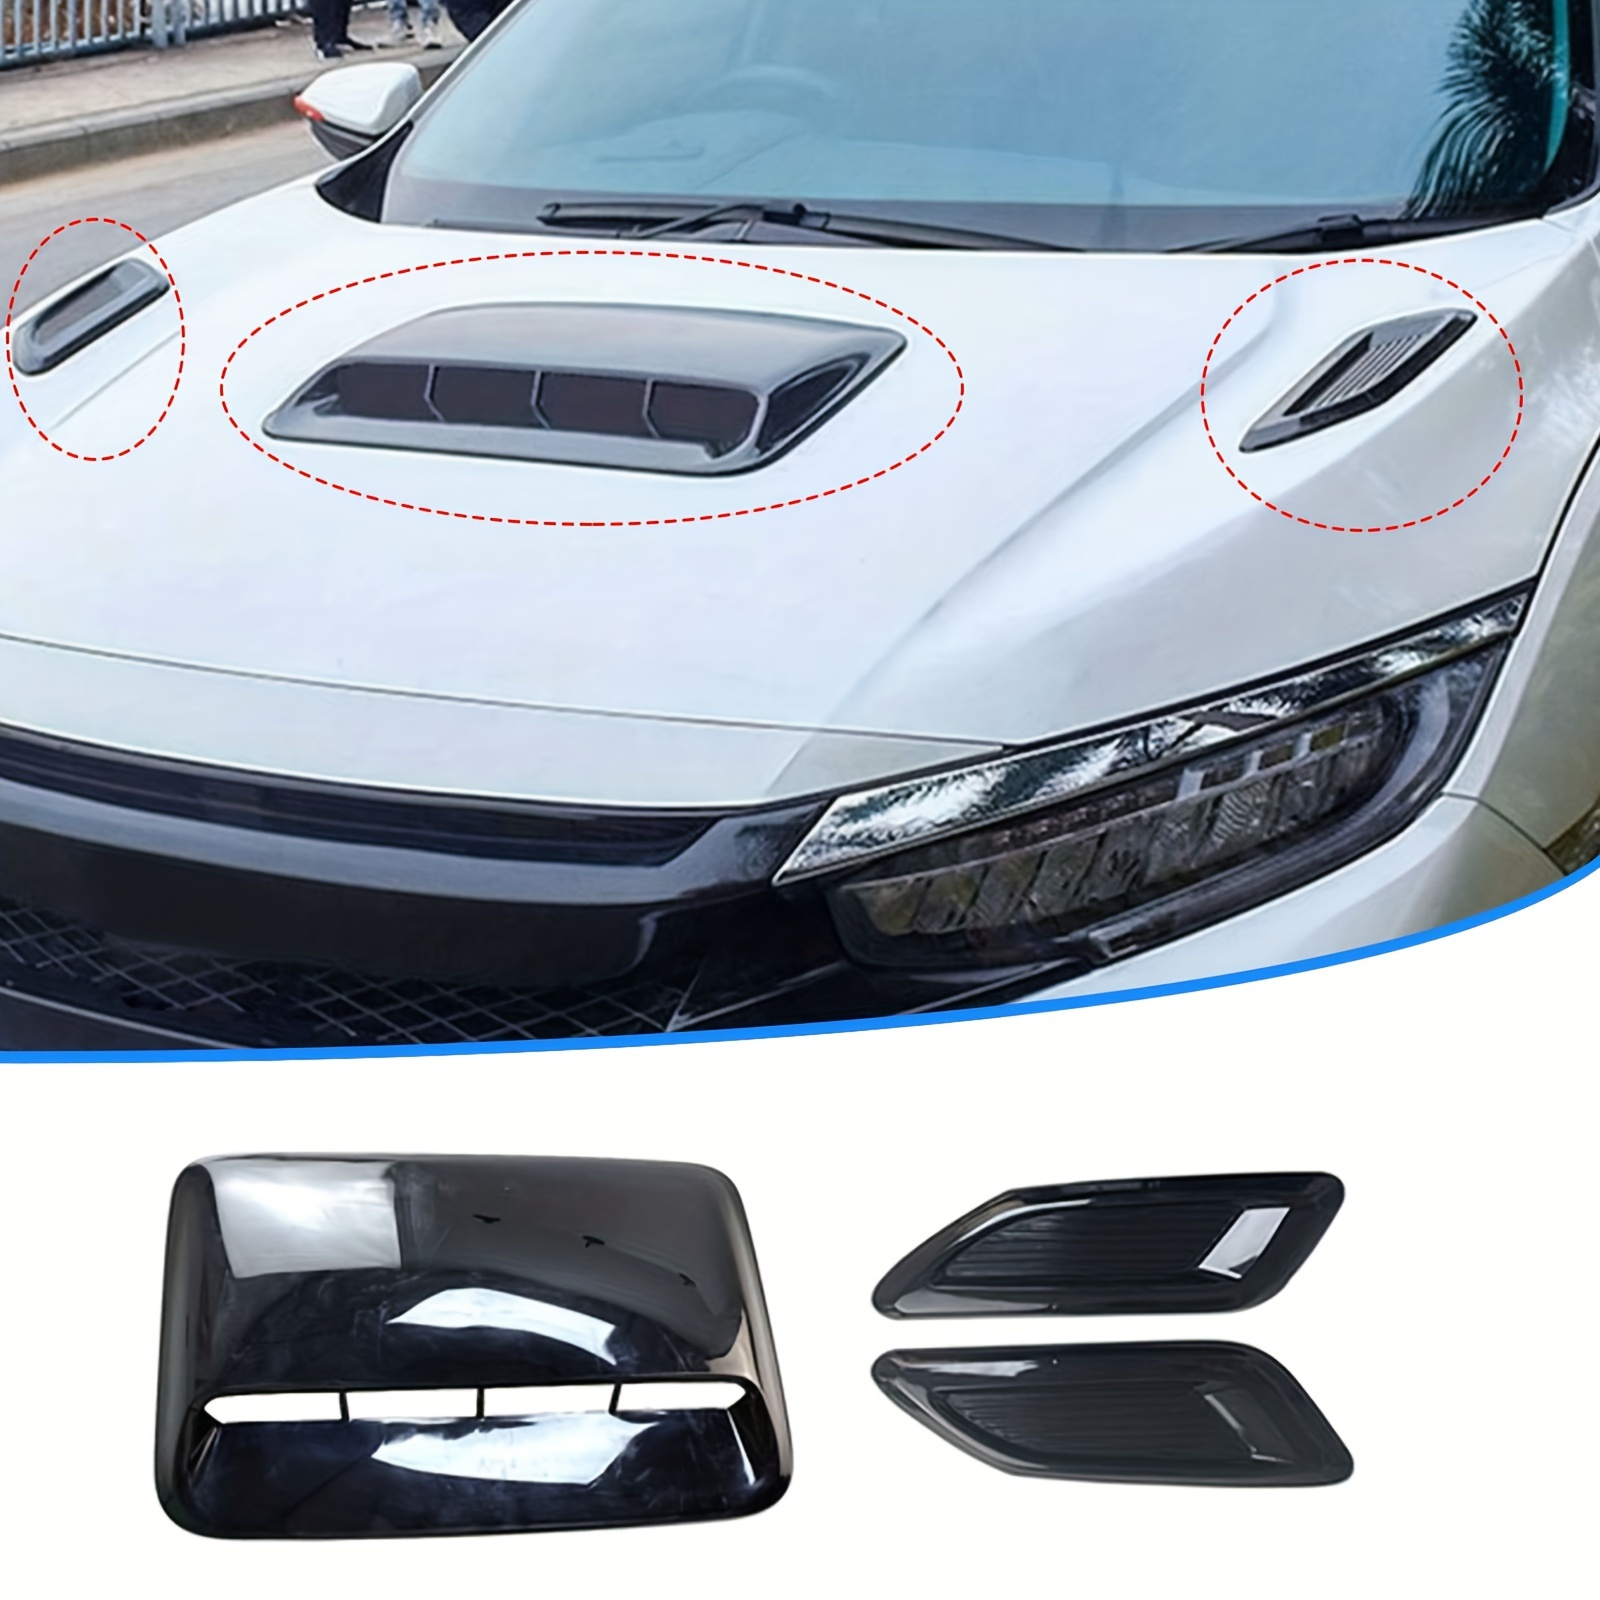 ABS Auto Air Intake Scoop Bonnet Hood Vent Front Hood Vent Abdeckung Für Ford  Mustang 2015 2016 2017 2018 2019 2020